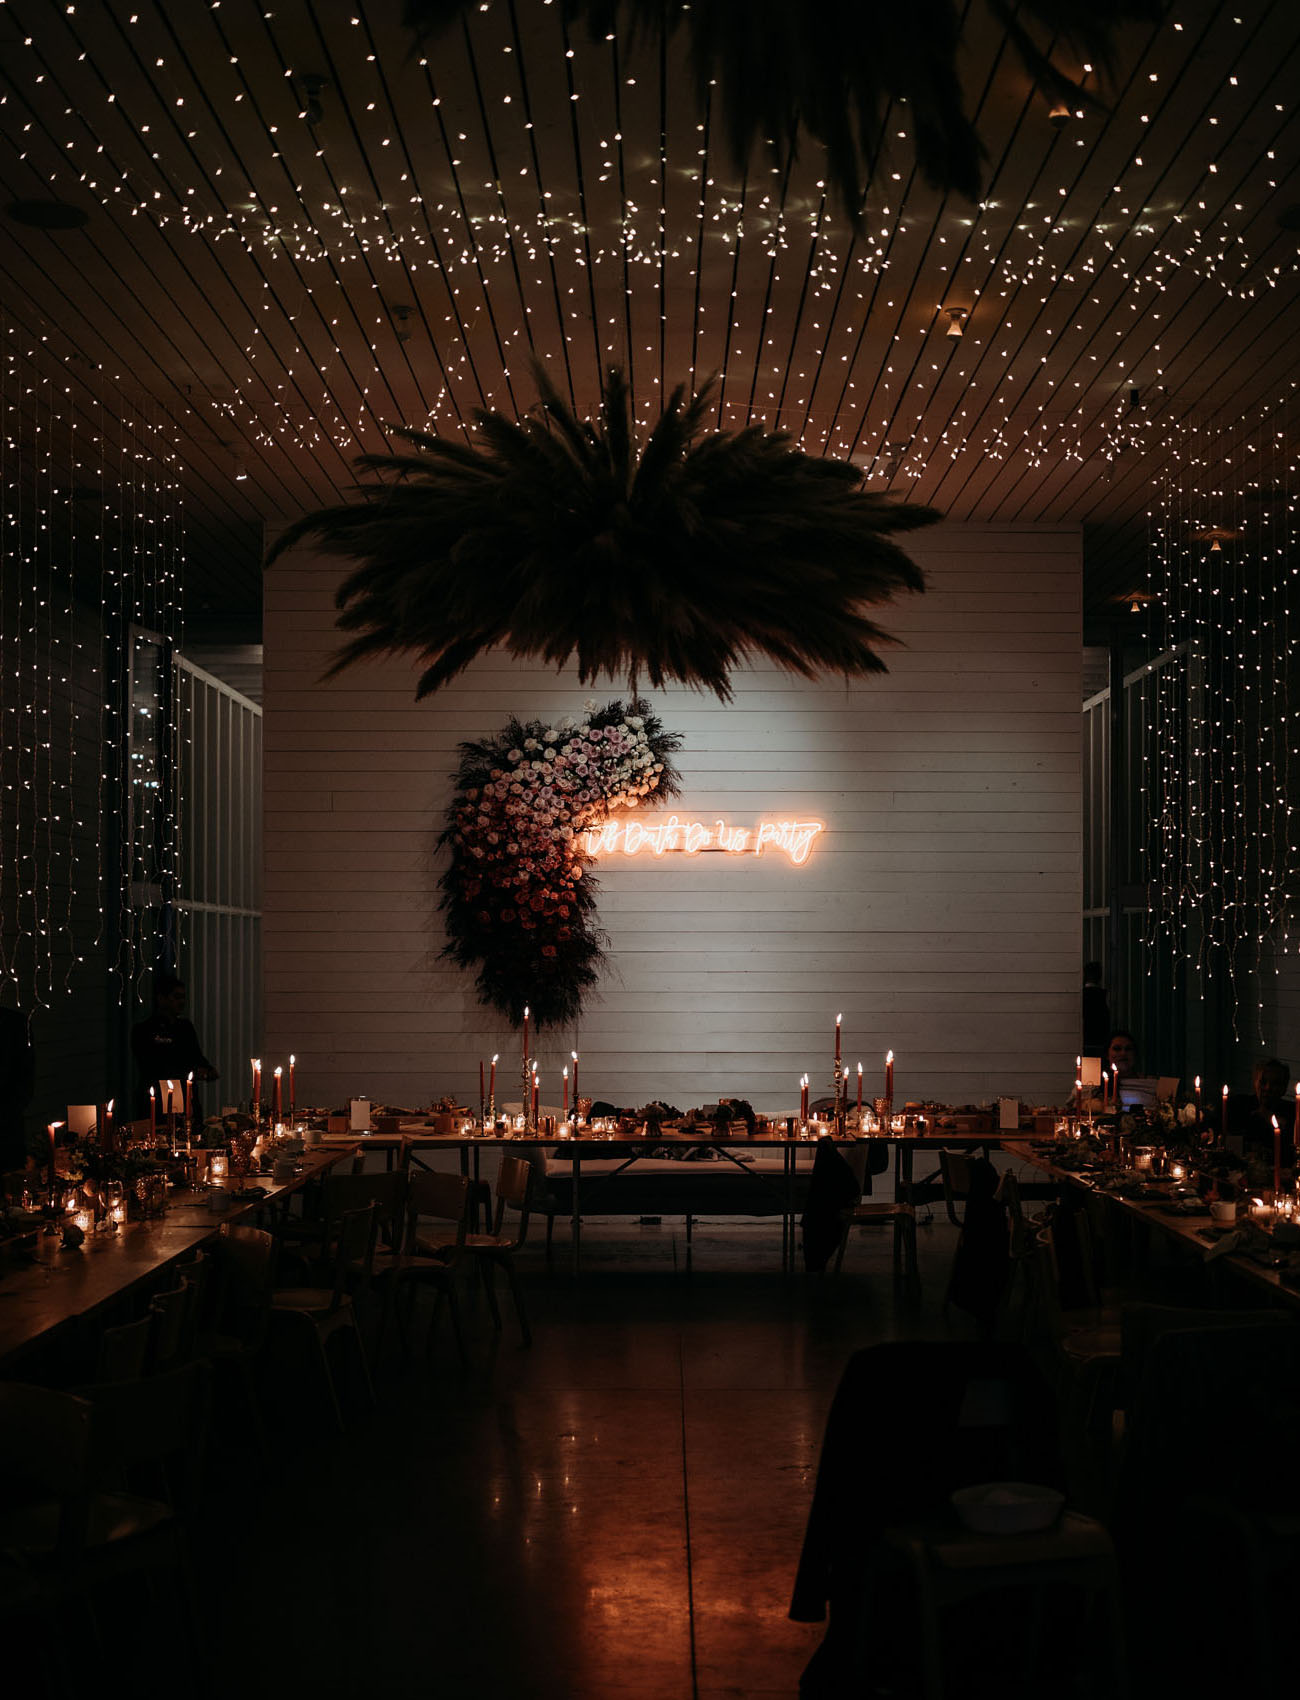 Look how magical is the reception by lights and candles